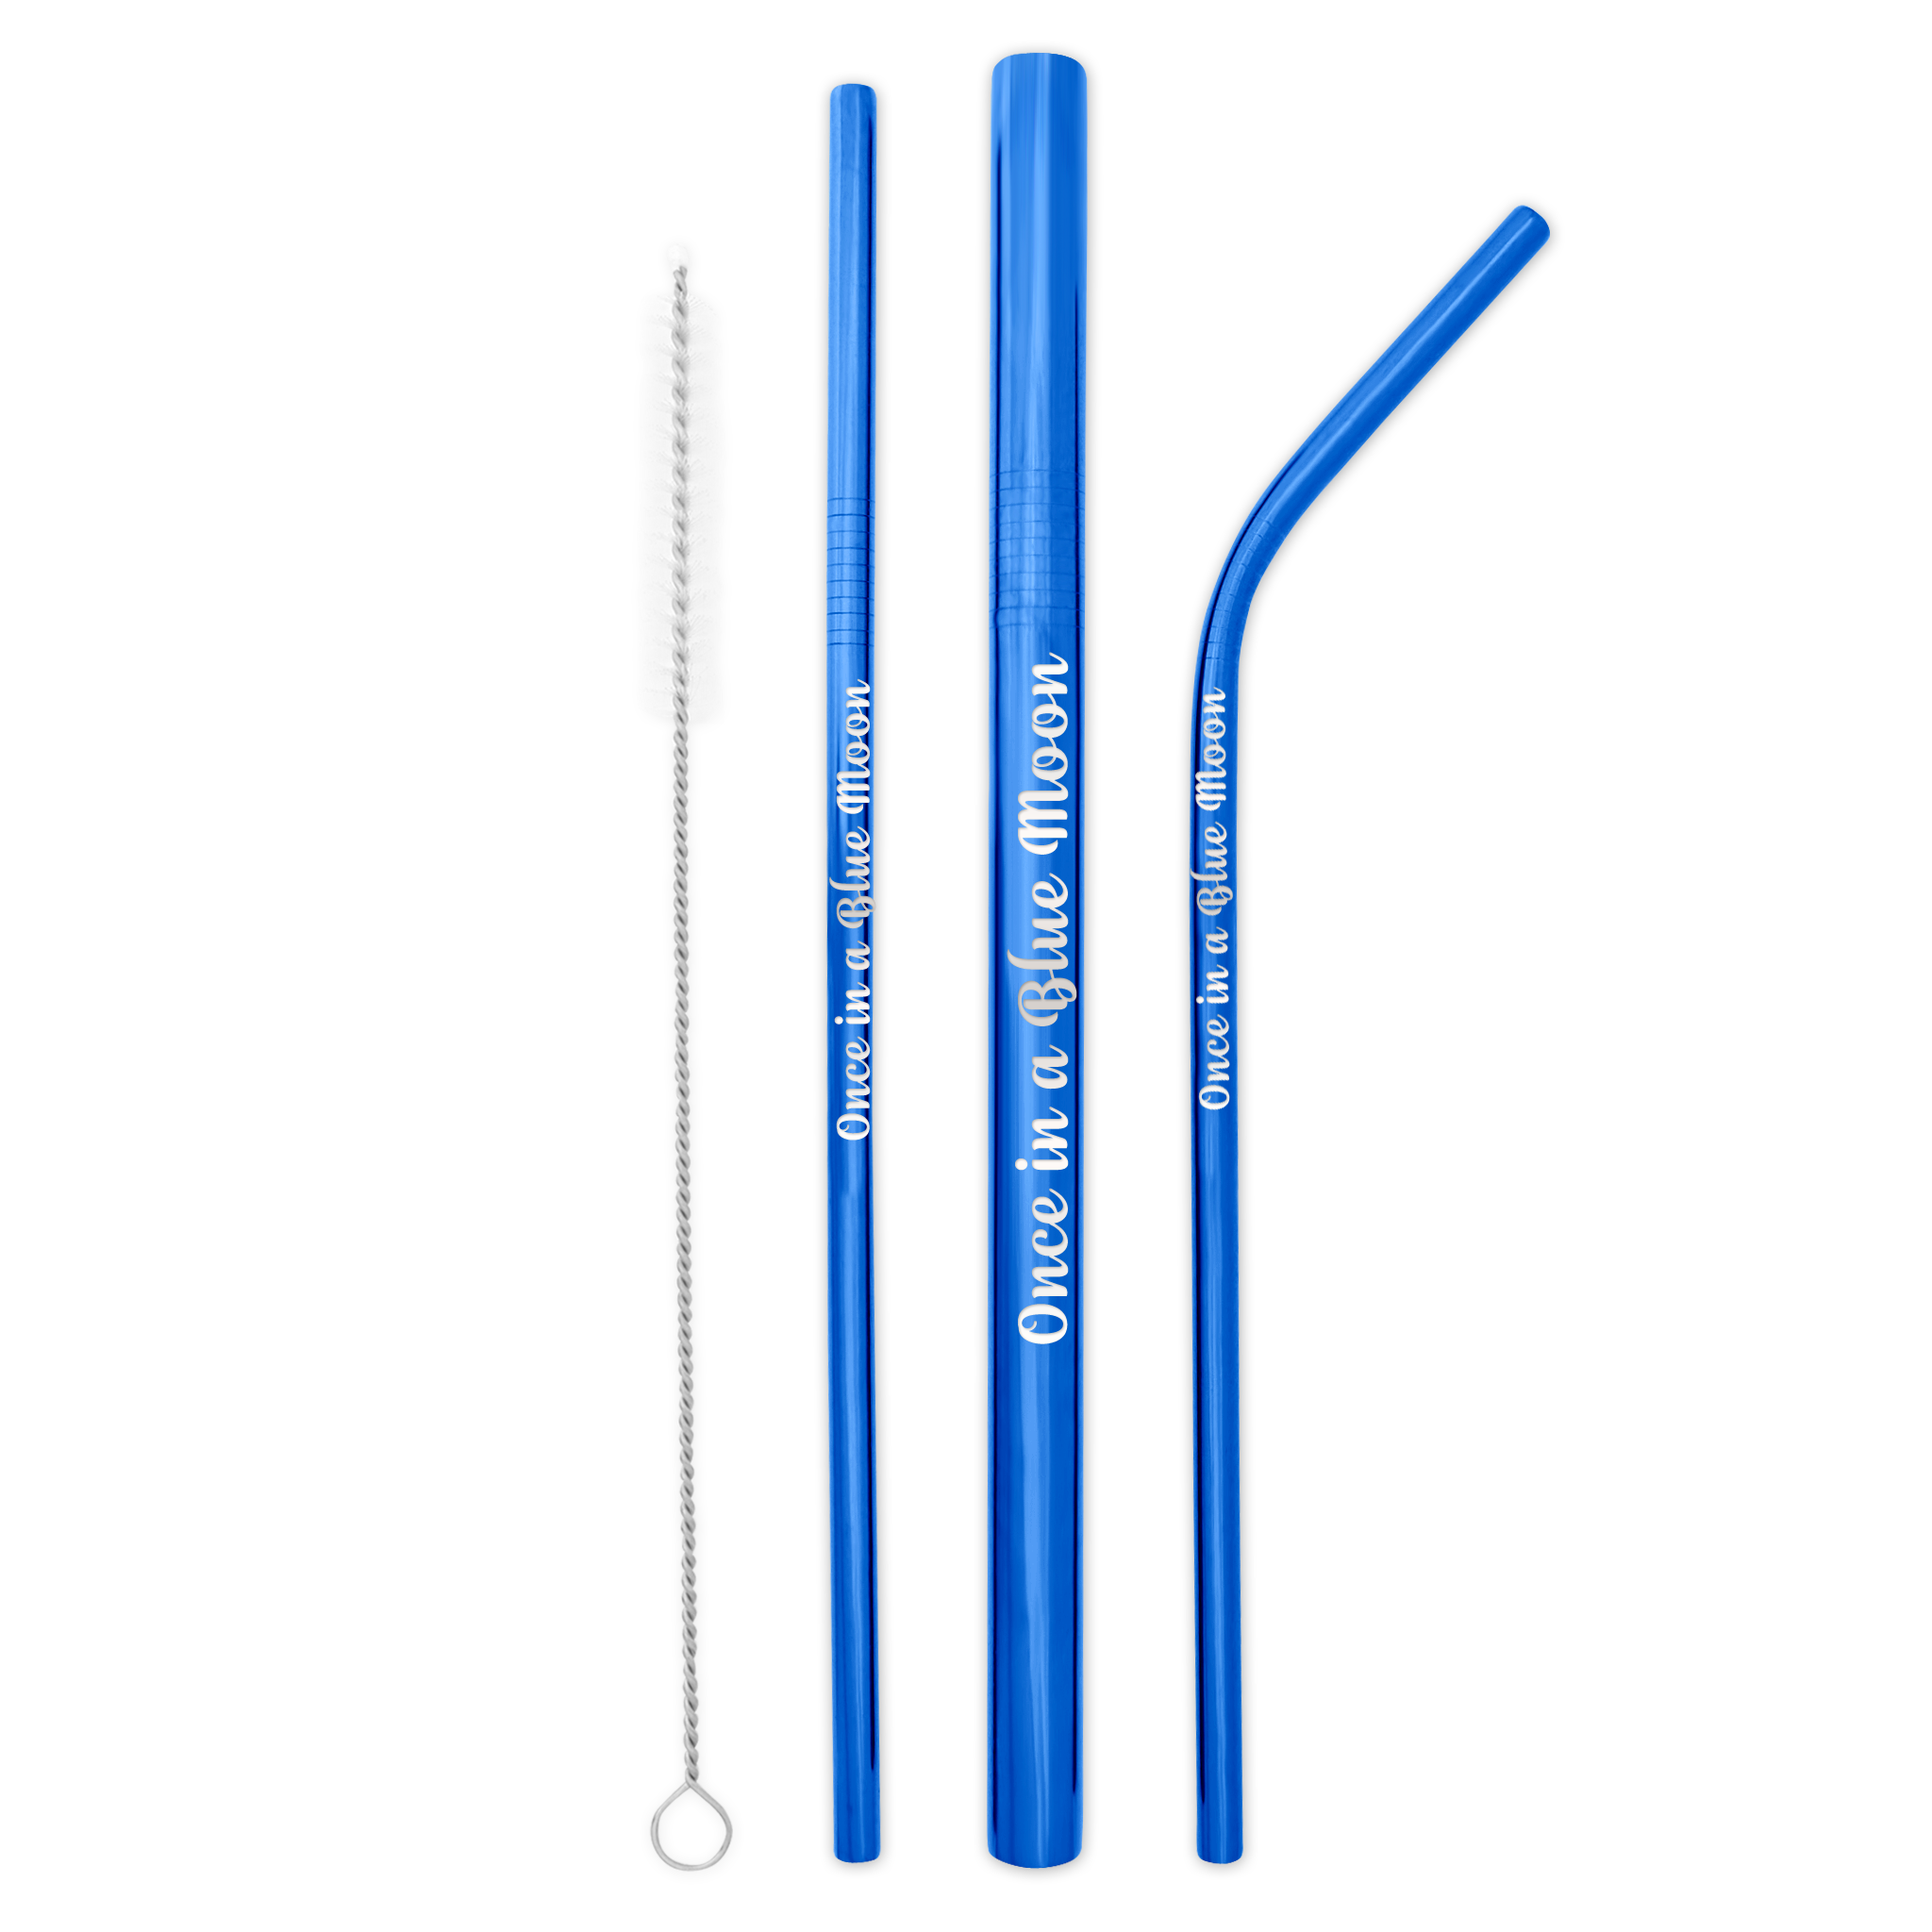 Triple Threat Stainless Steel Straw Set with Travel Pouch (Blue)